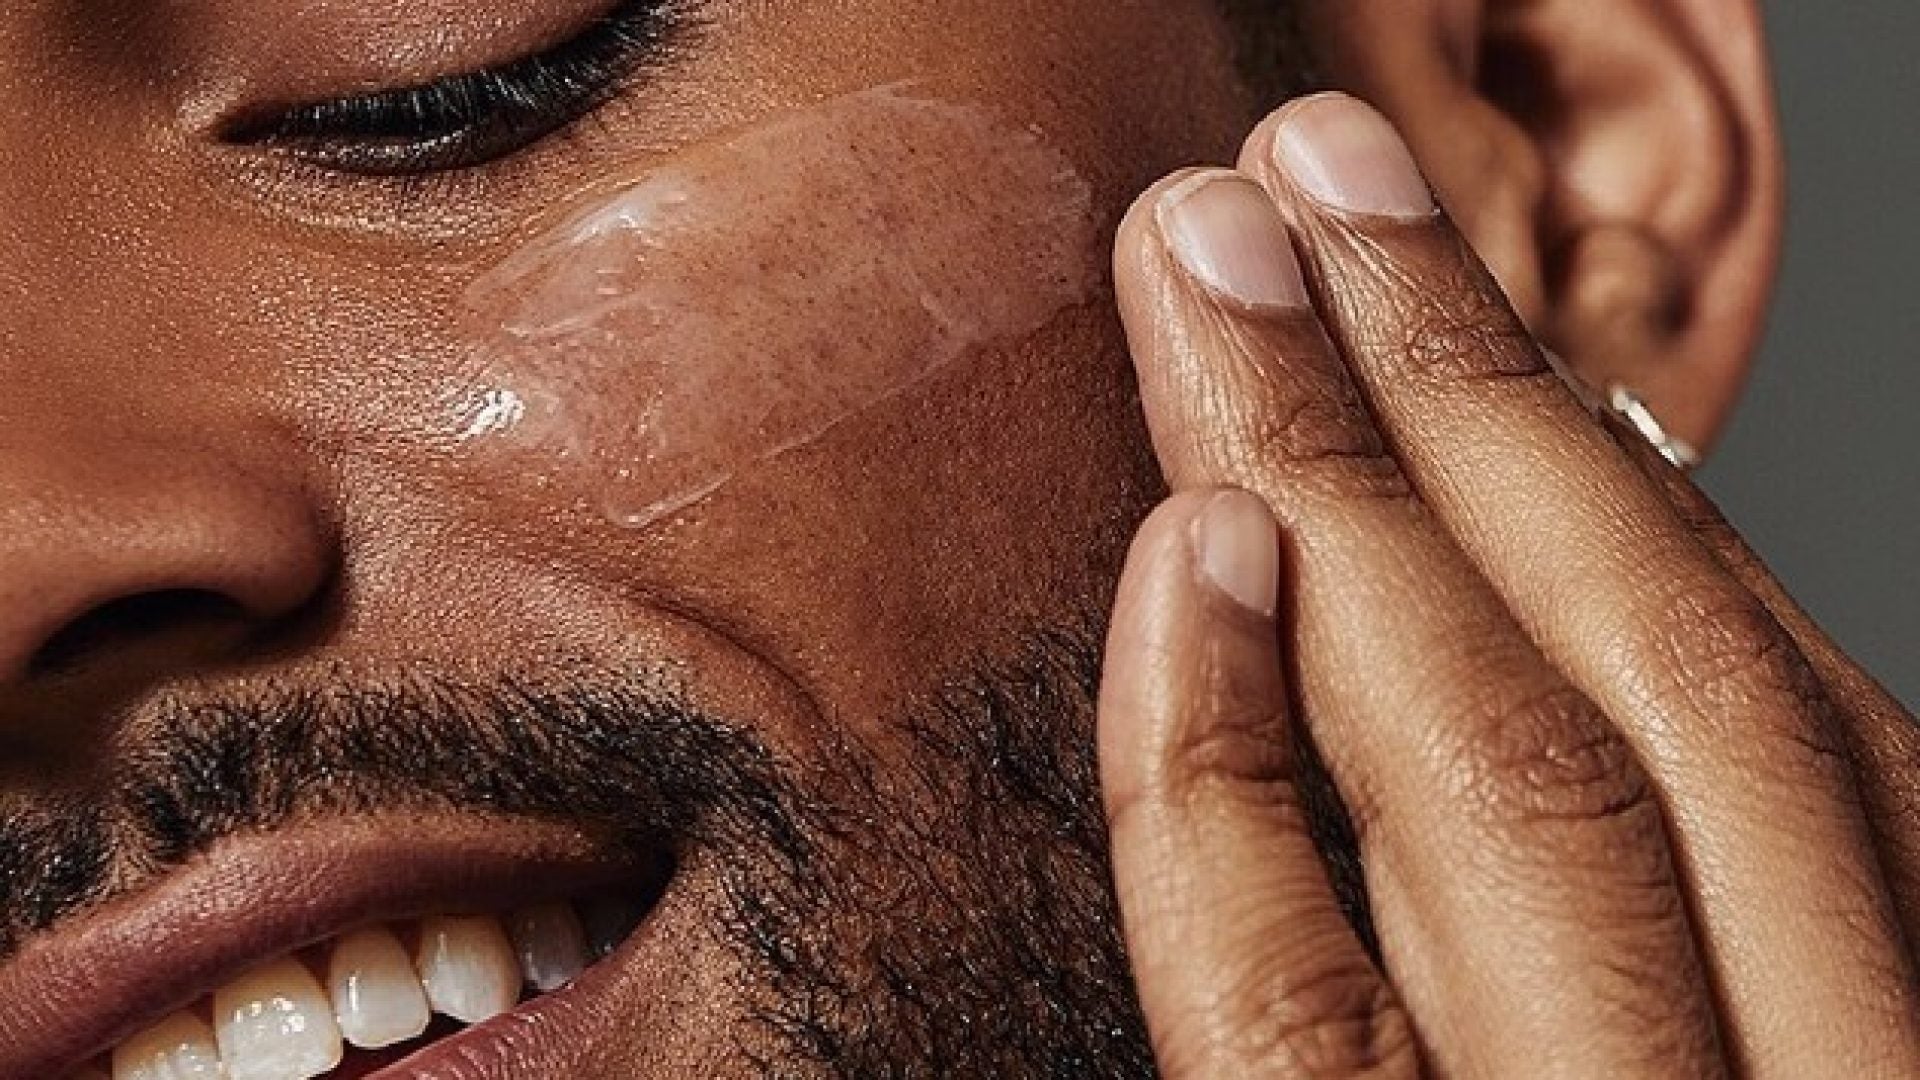 Bevel Launches A New Line Of Body, Skin, And Hair Care Products For Men